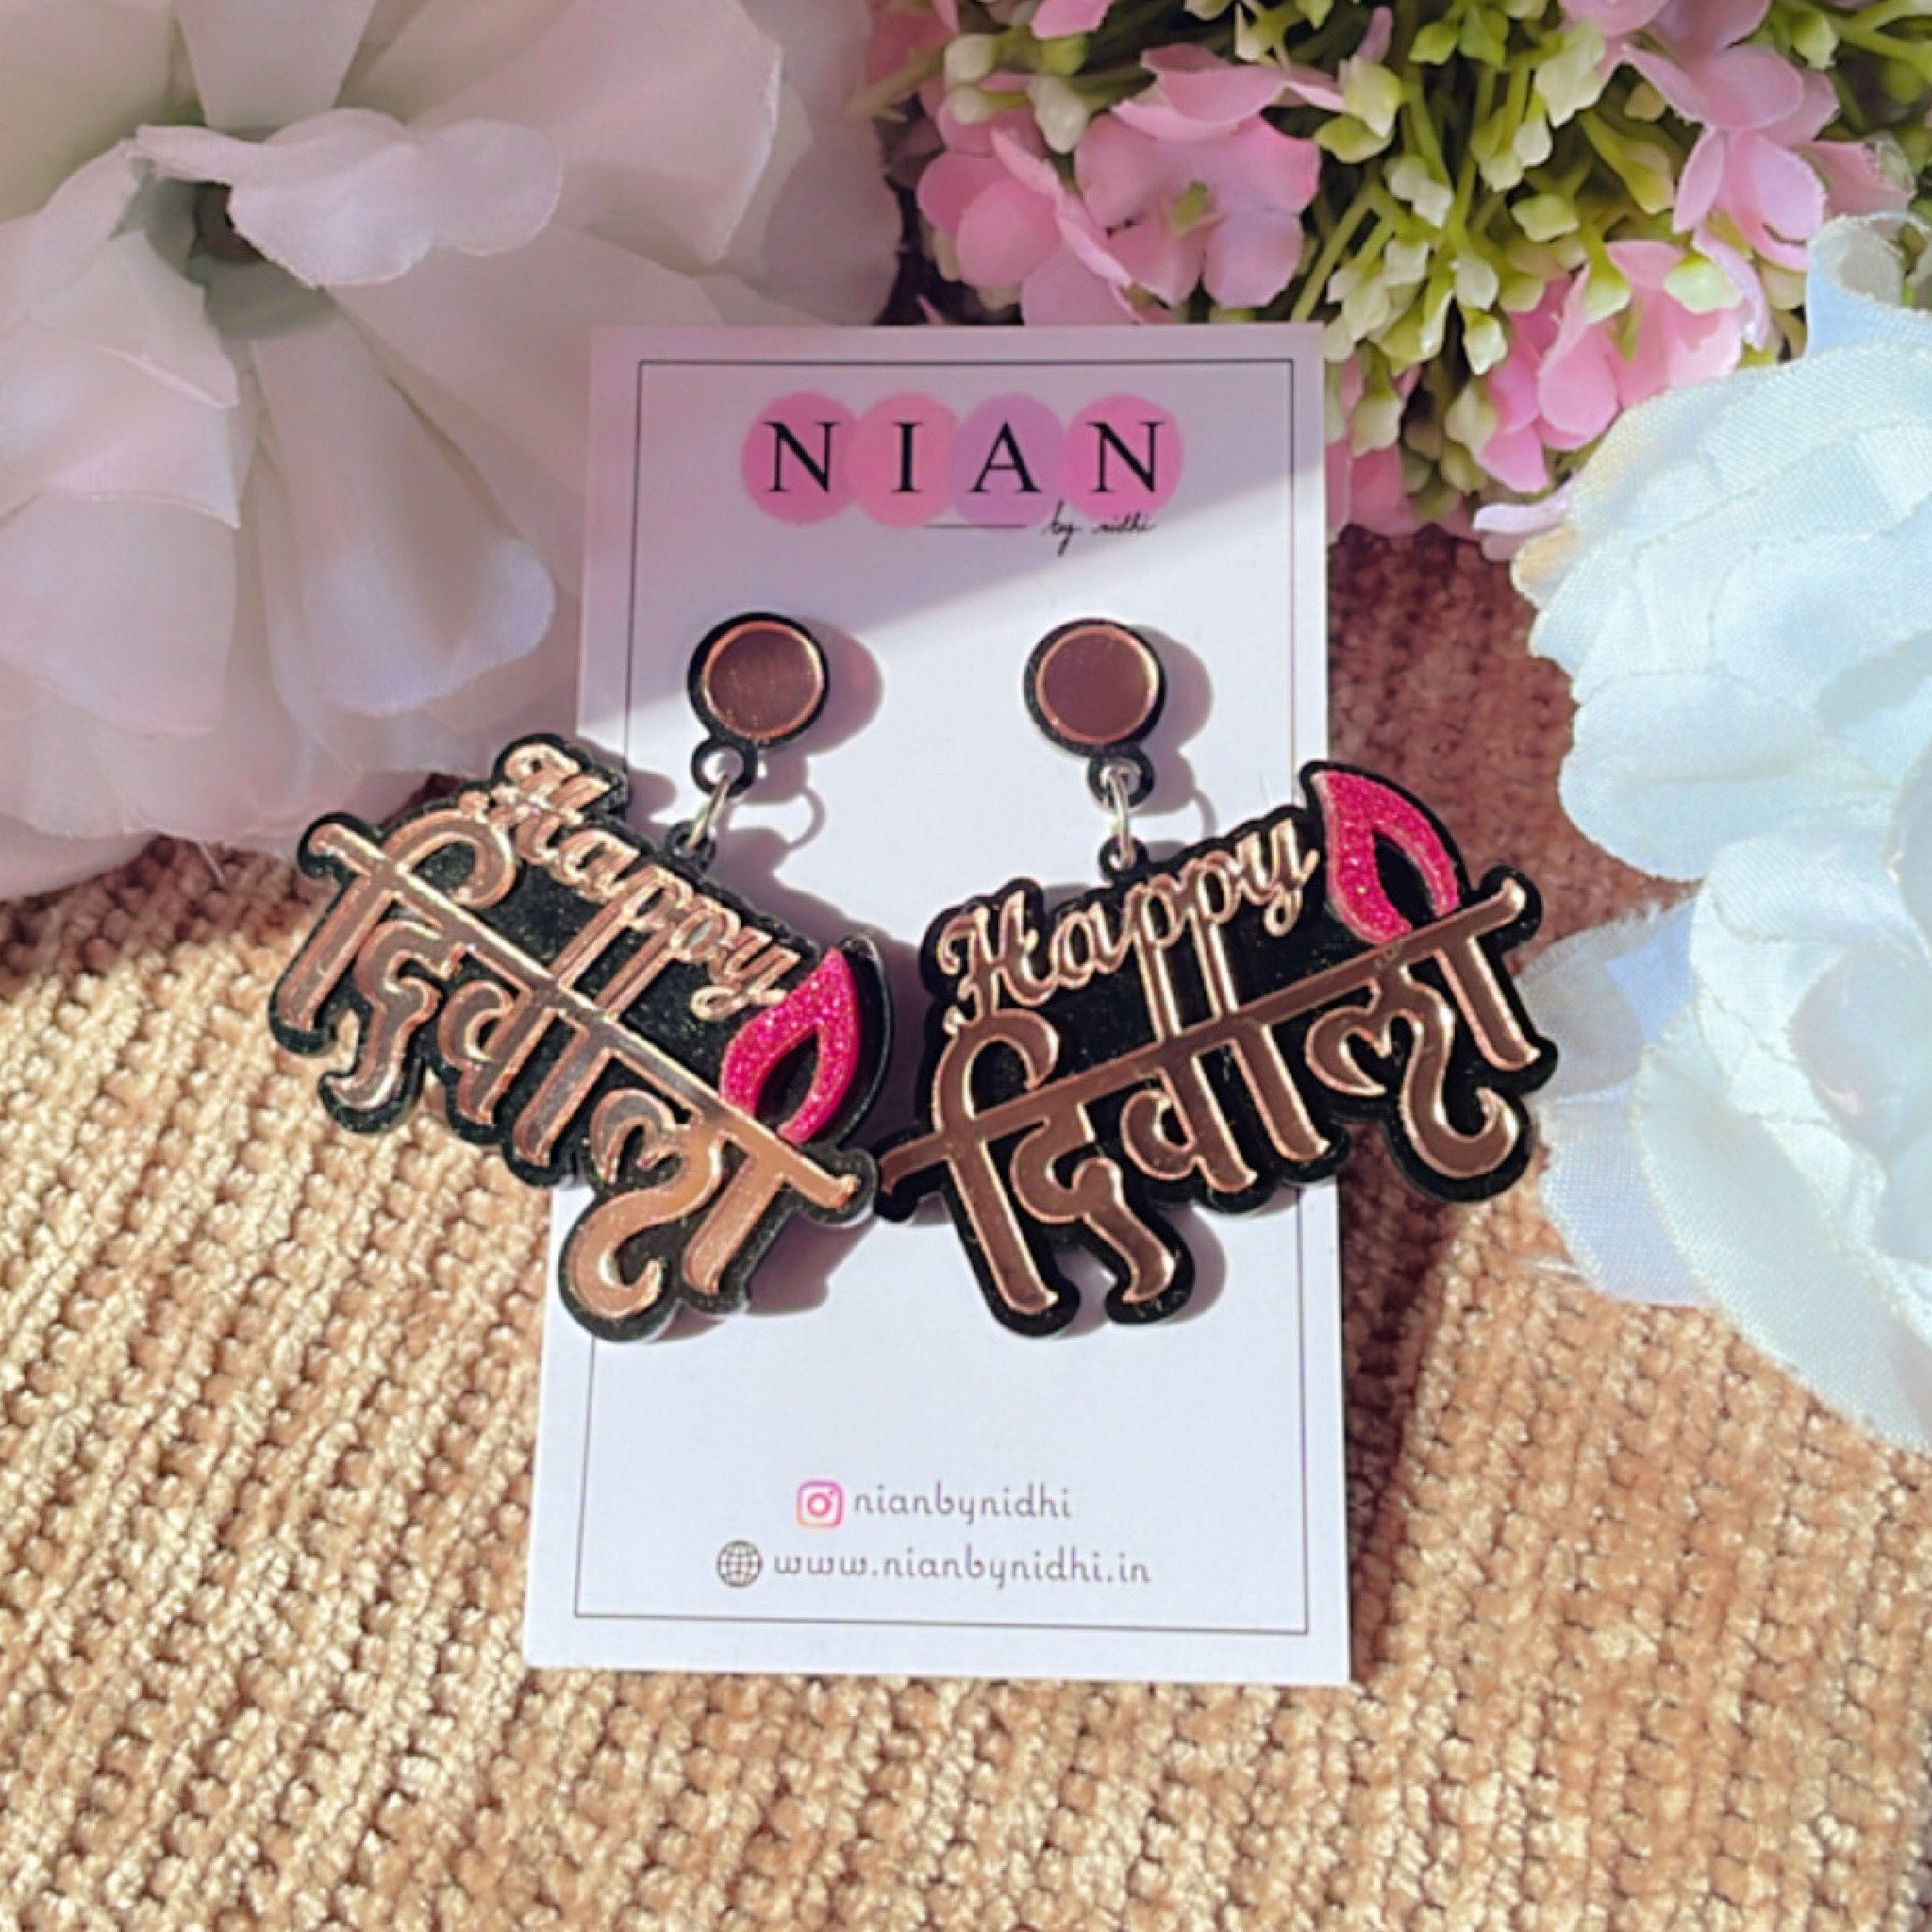 Happy Diwali Earrings - Rosegold and Pink on Black base - Nian by Nidhi - placed in a light flowery background